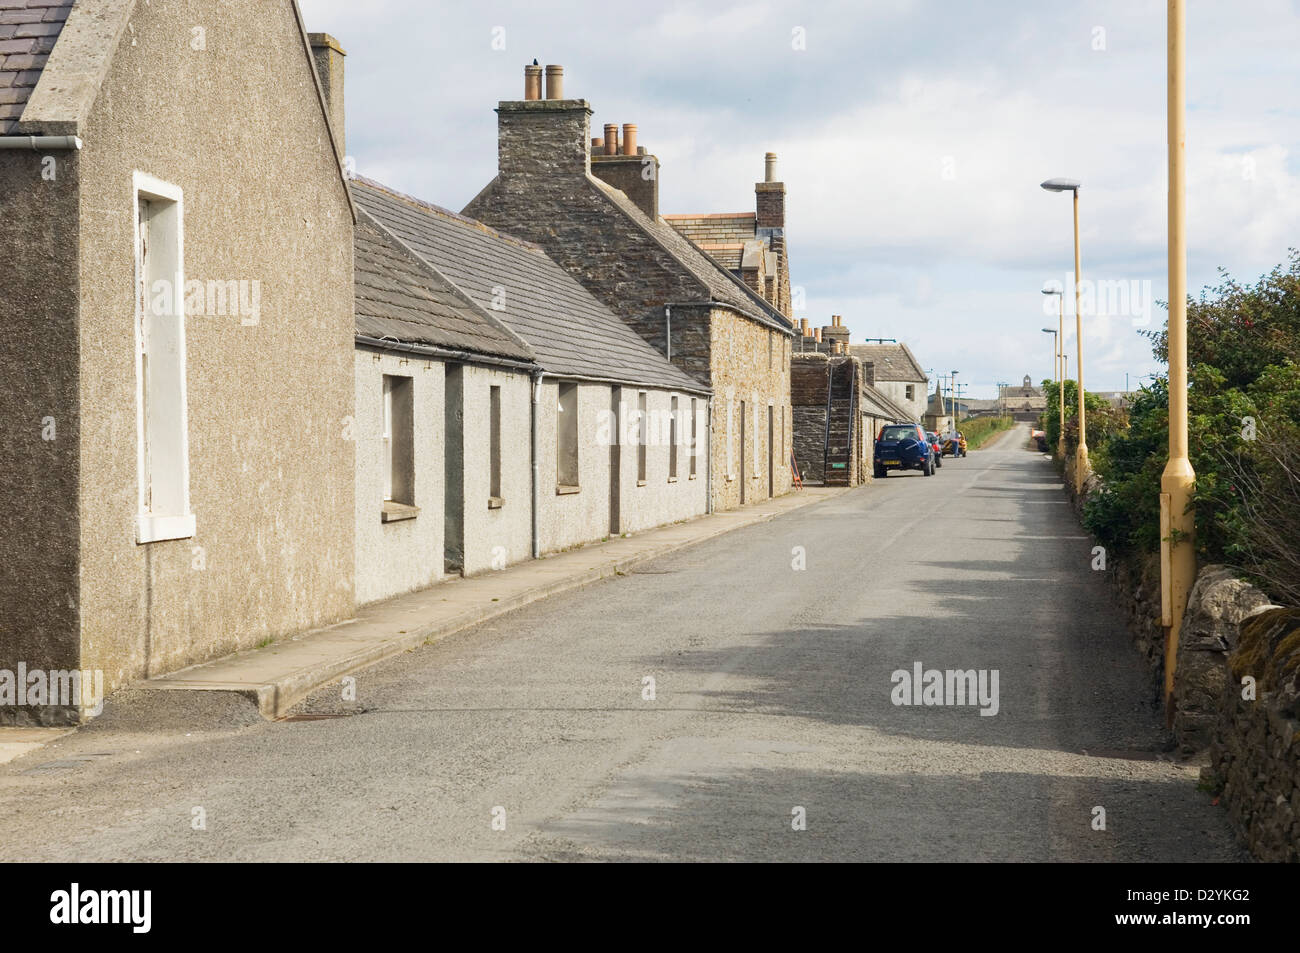 Balfour village on the island of Shapinsay, Orkney Islands, Scotland. Stock Photo